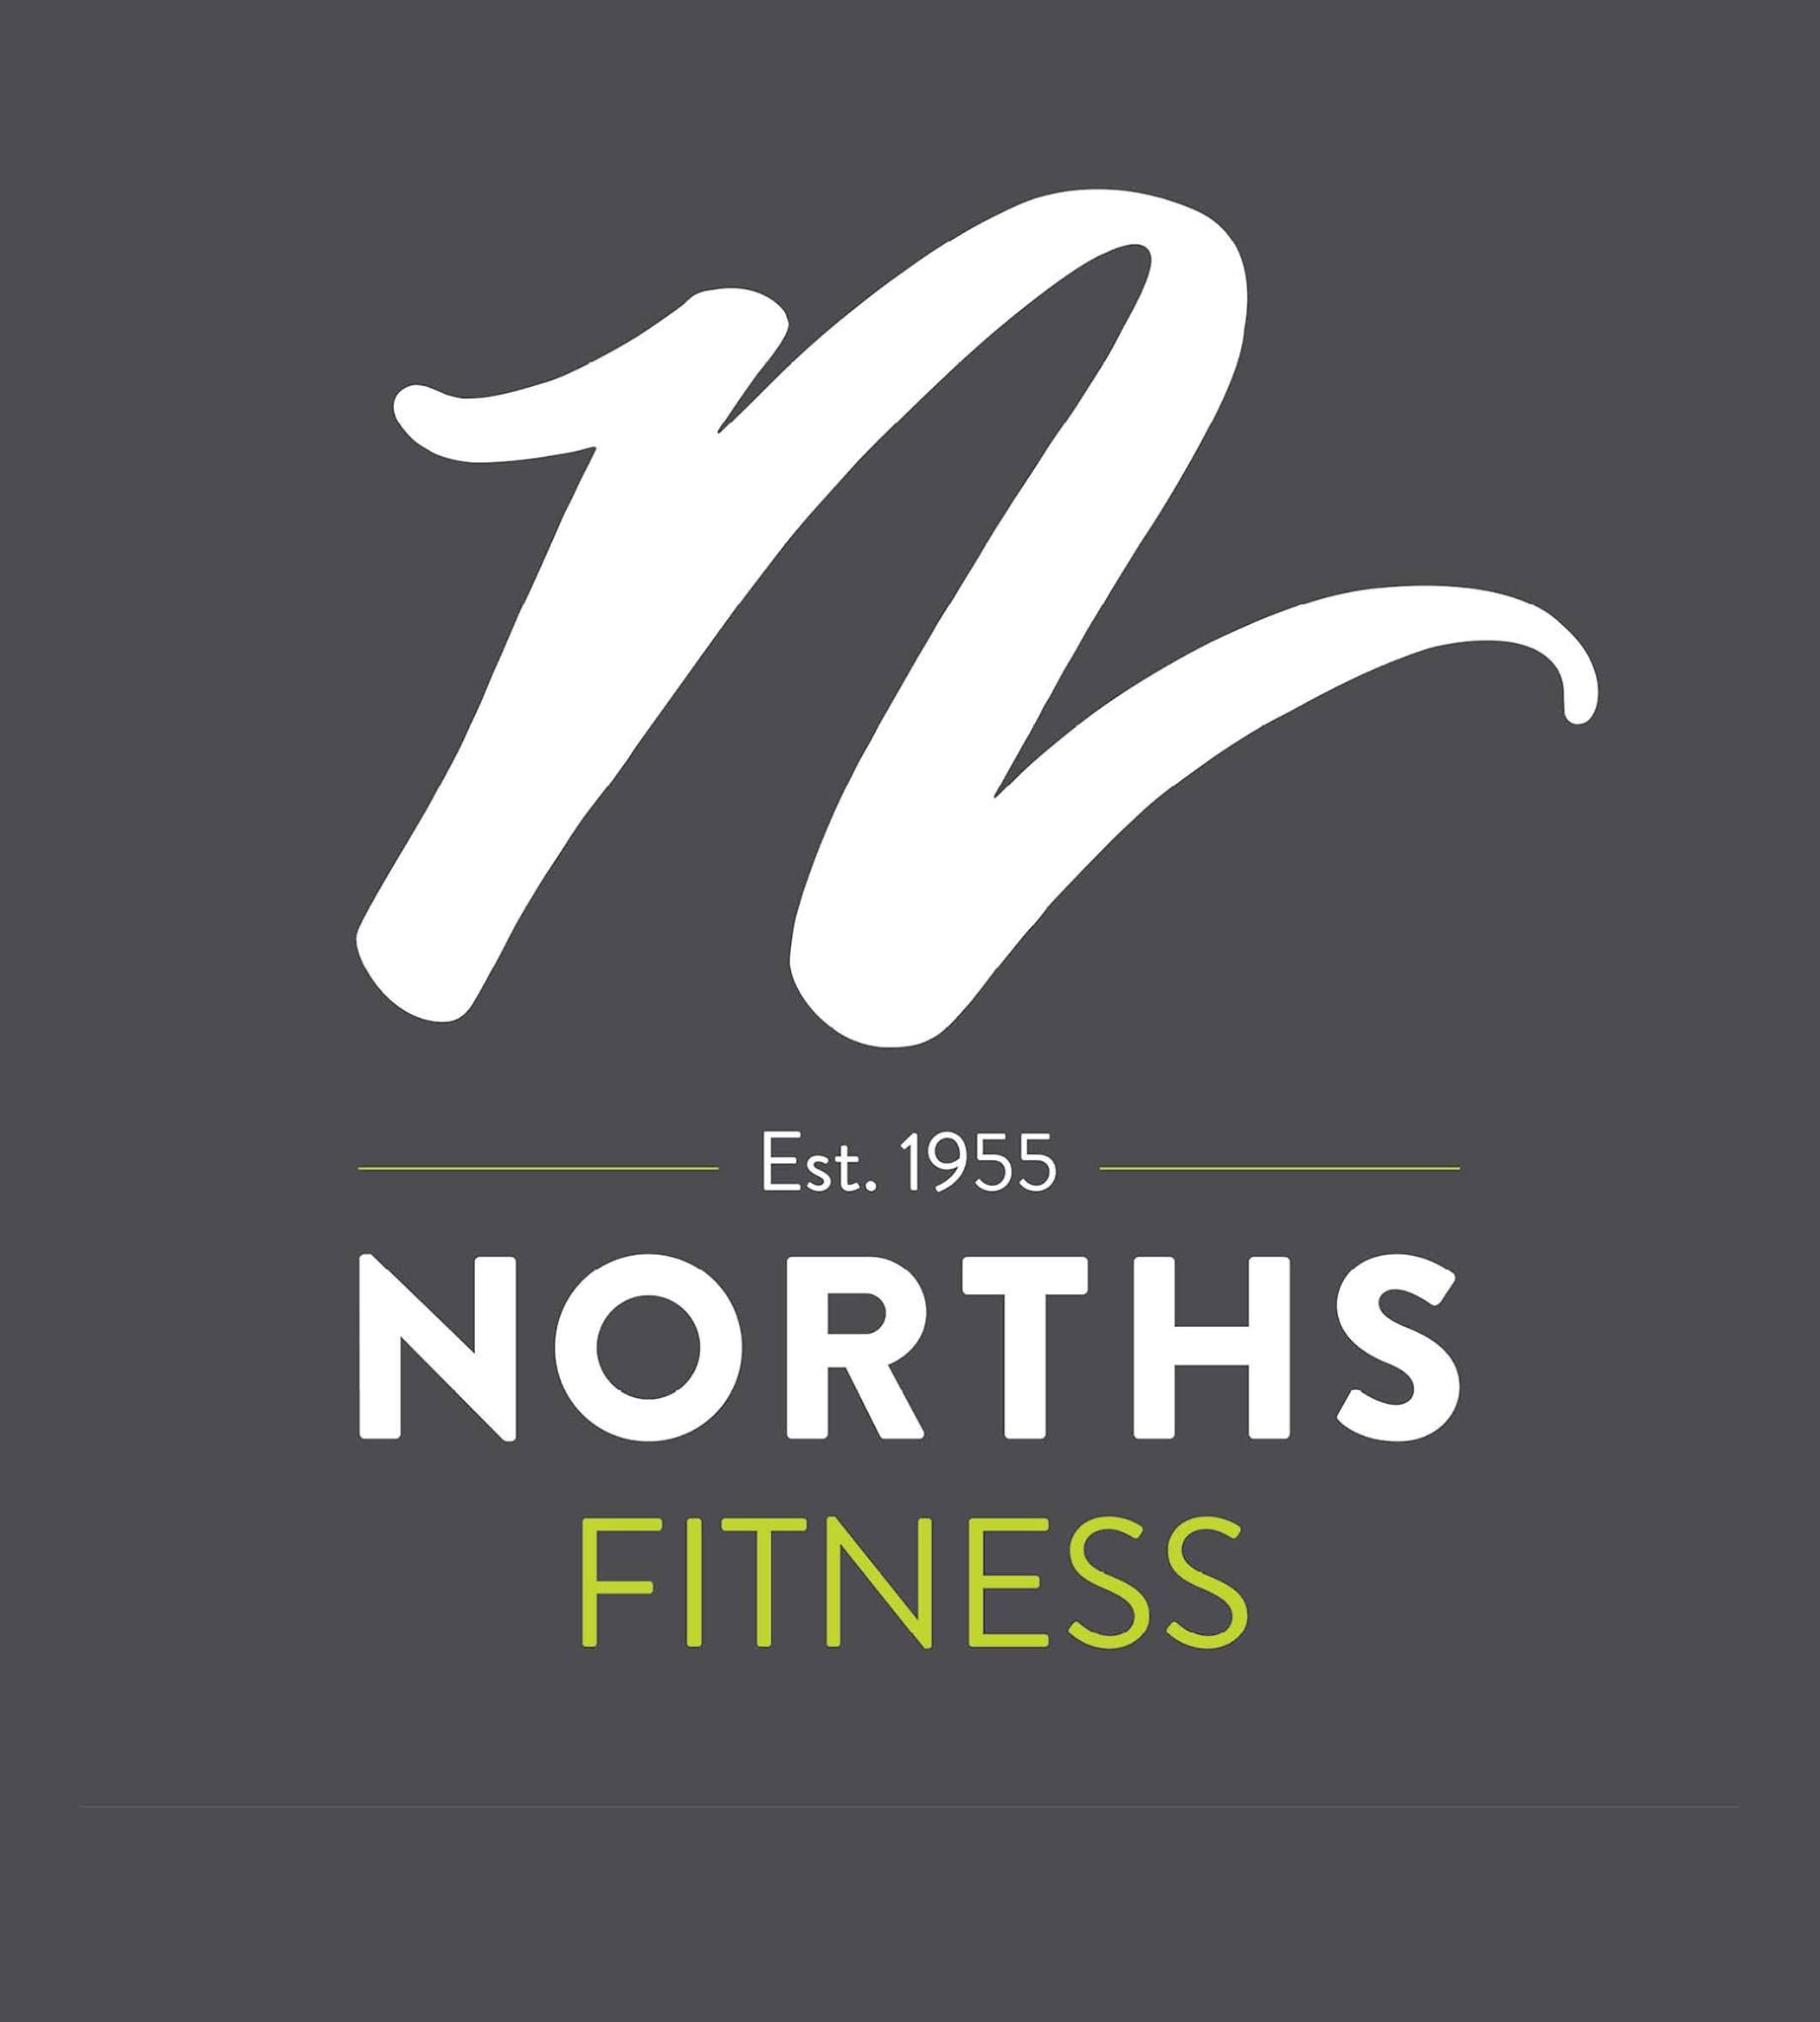 Fitness and Lifestyle Specialist